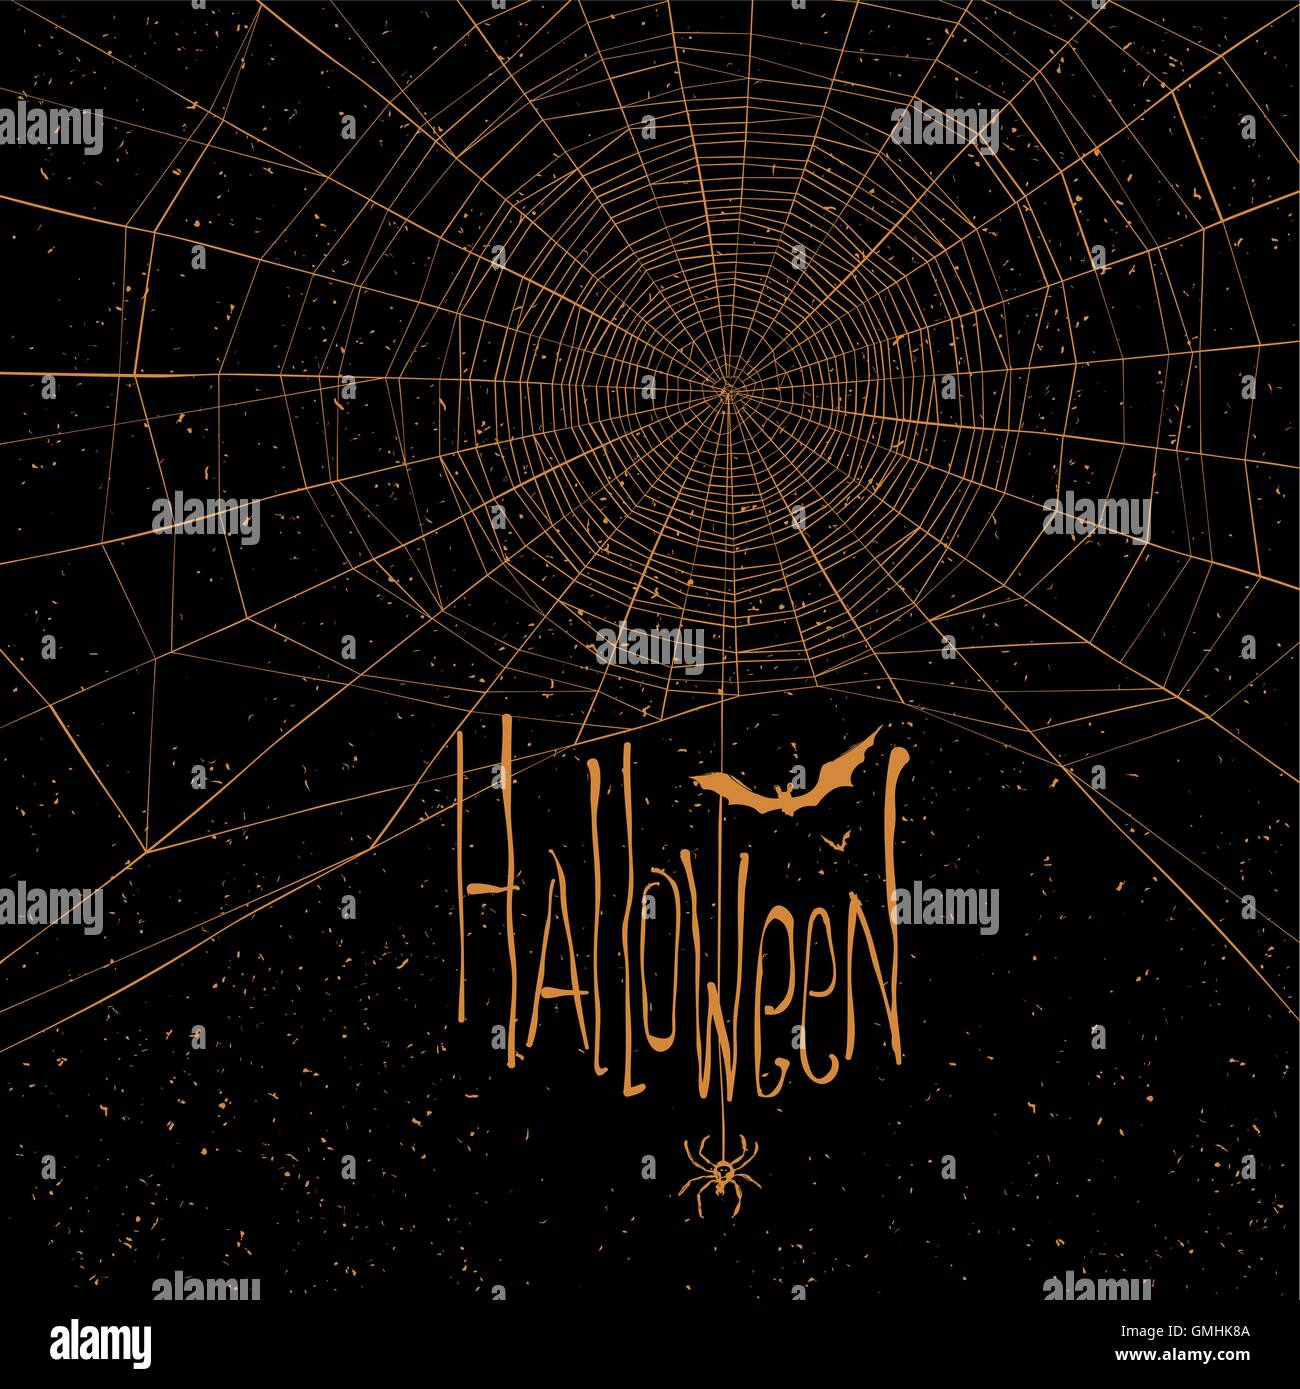 Halloween themed background with spider web and text Stock Vector